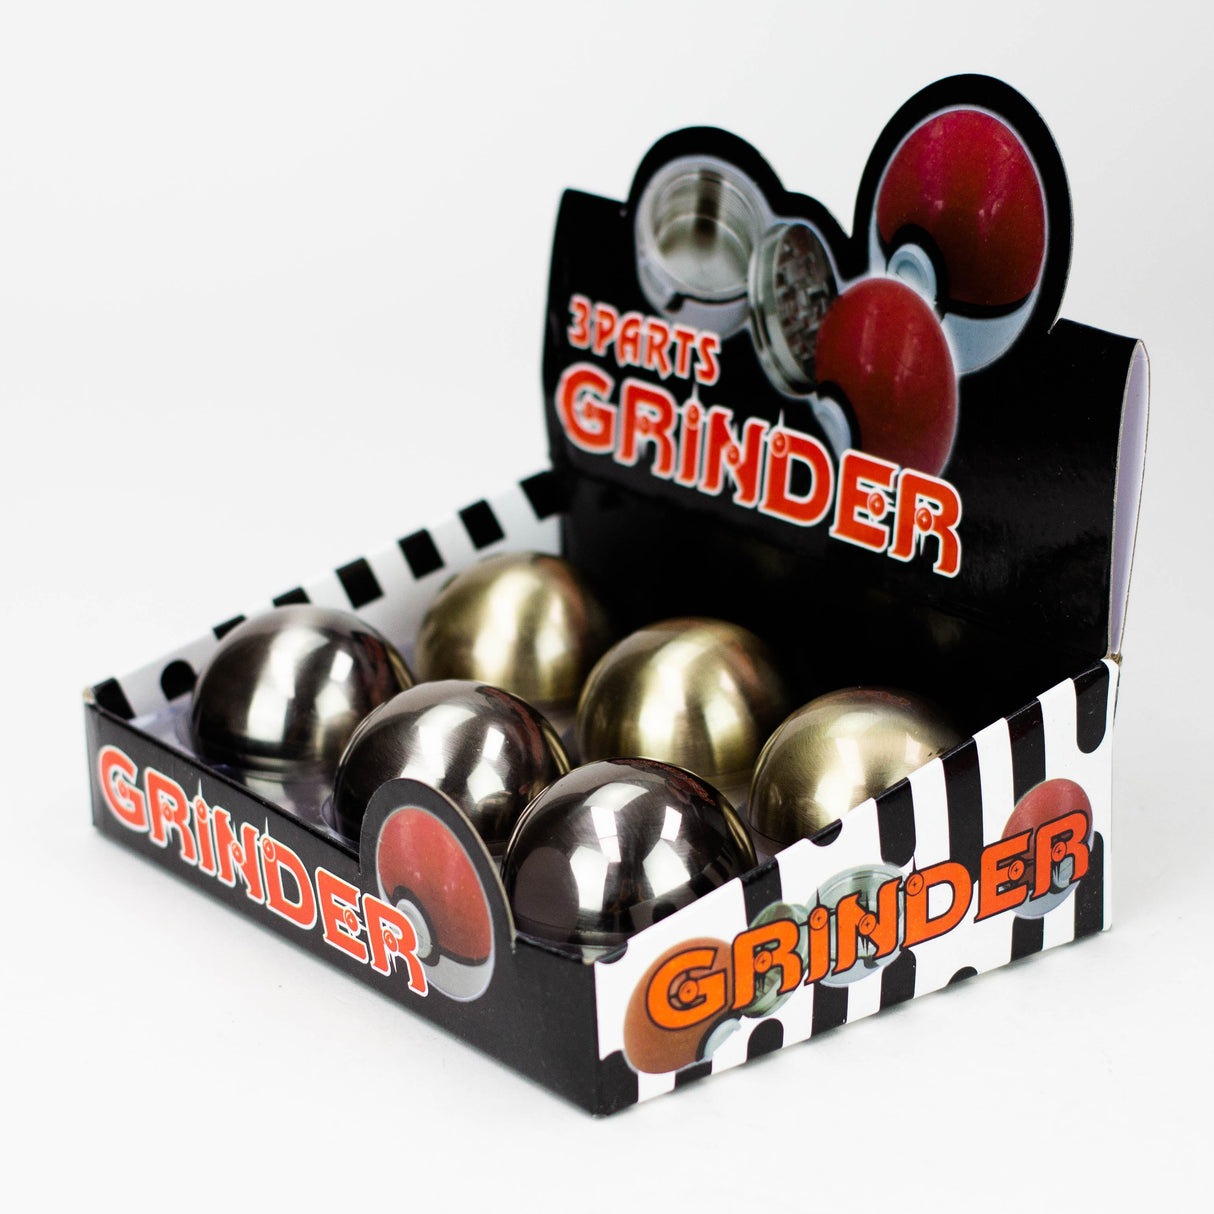 2" Ball Shape Metal Grinder 3 Layers Box of 6 [GZ6281]